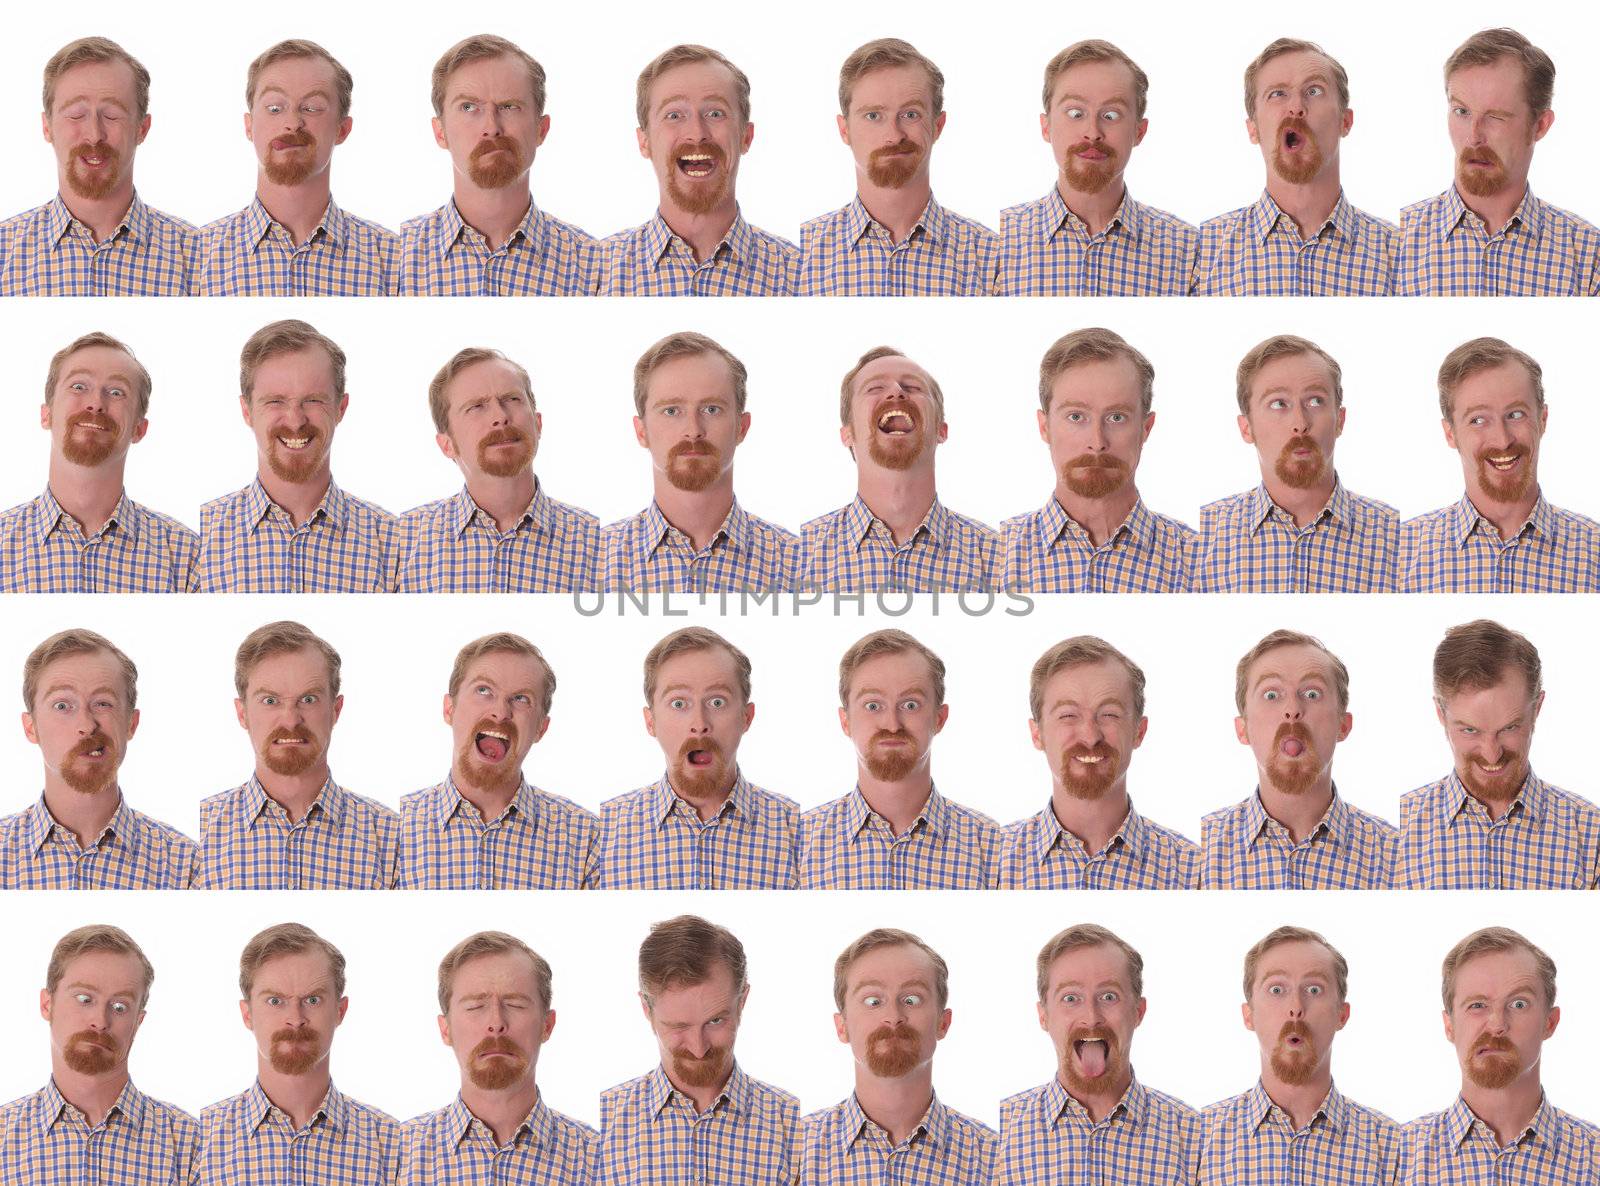 Details of large facial expressions on white background